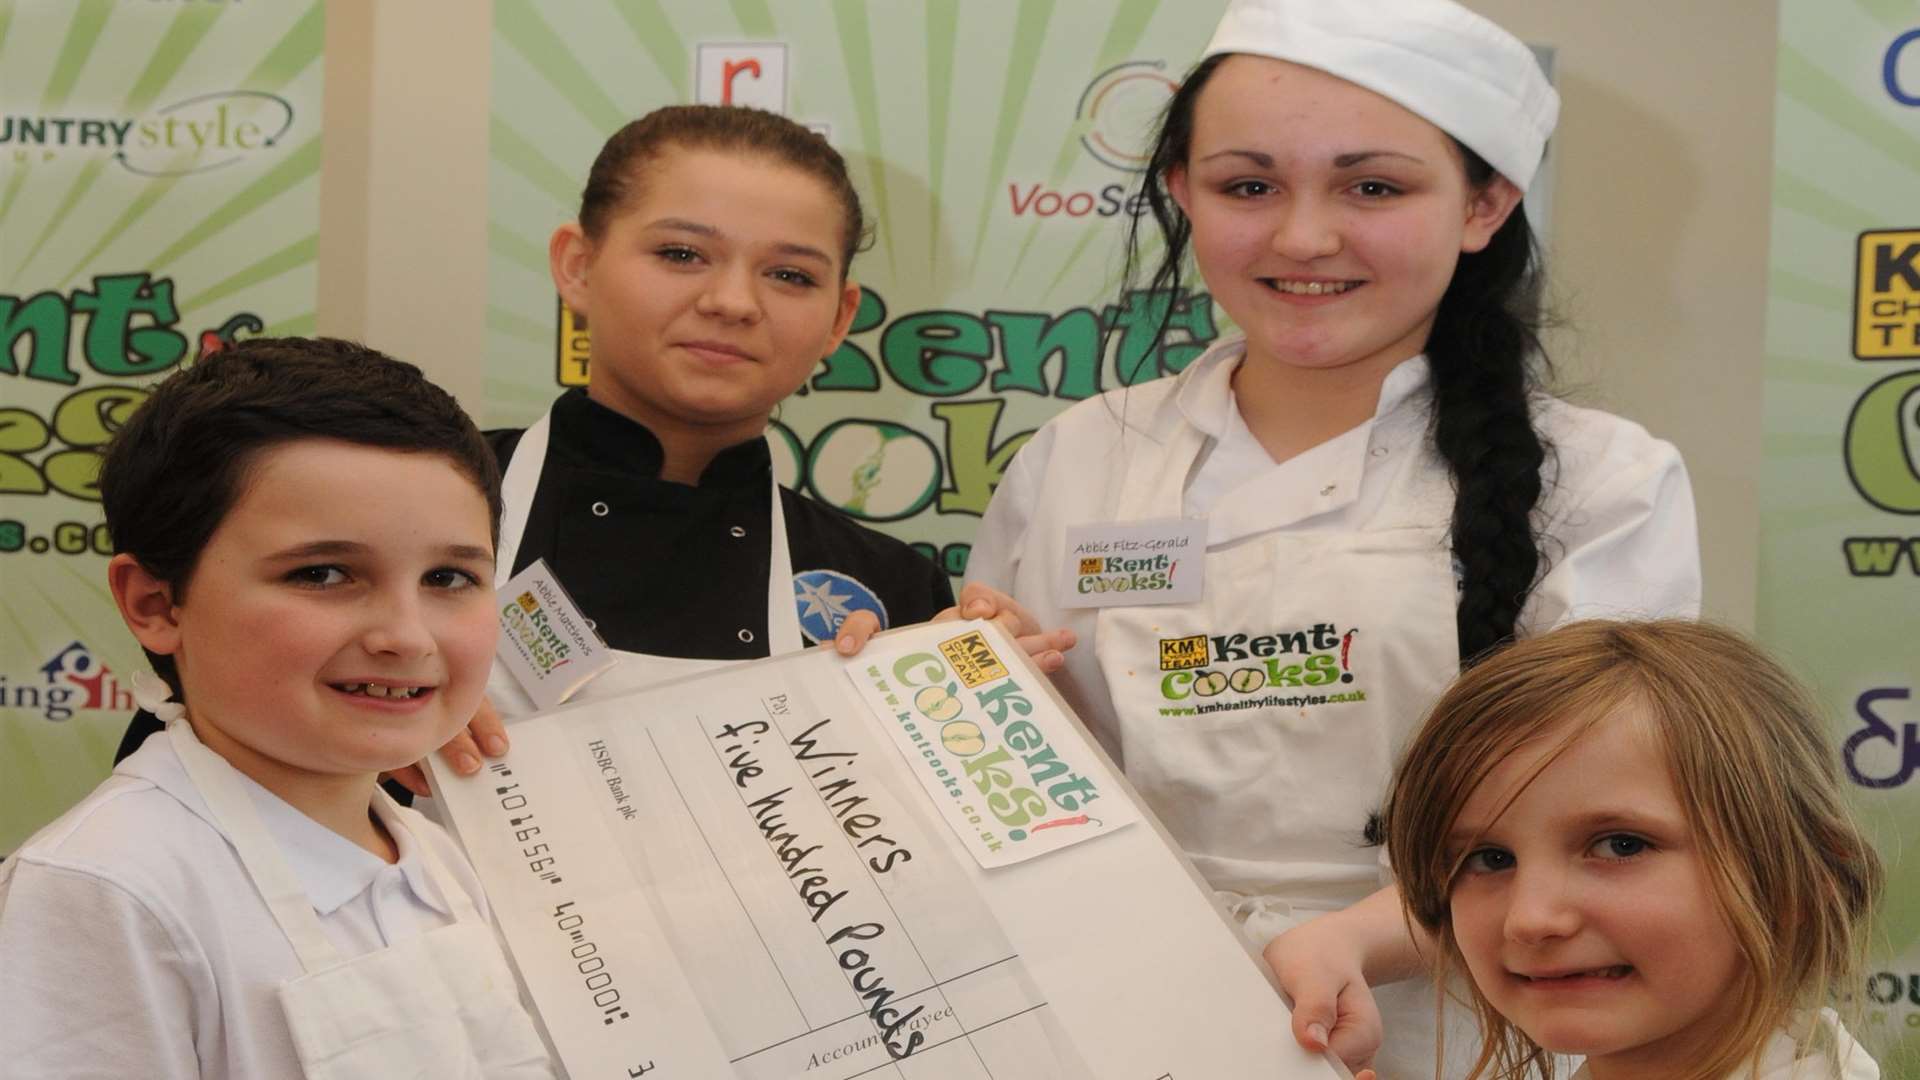 Do you know a young cook who could prepare a prize winning menu for the Kent Cooks contest?